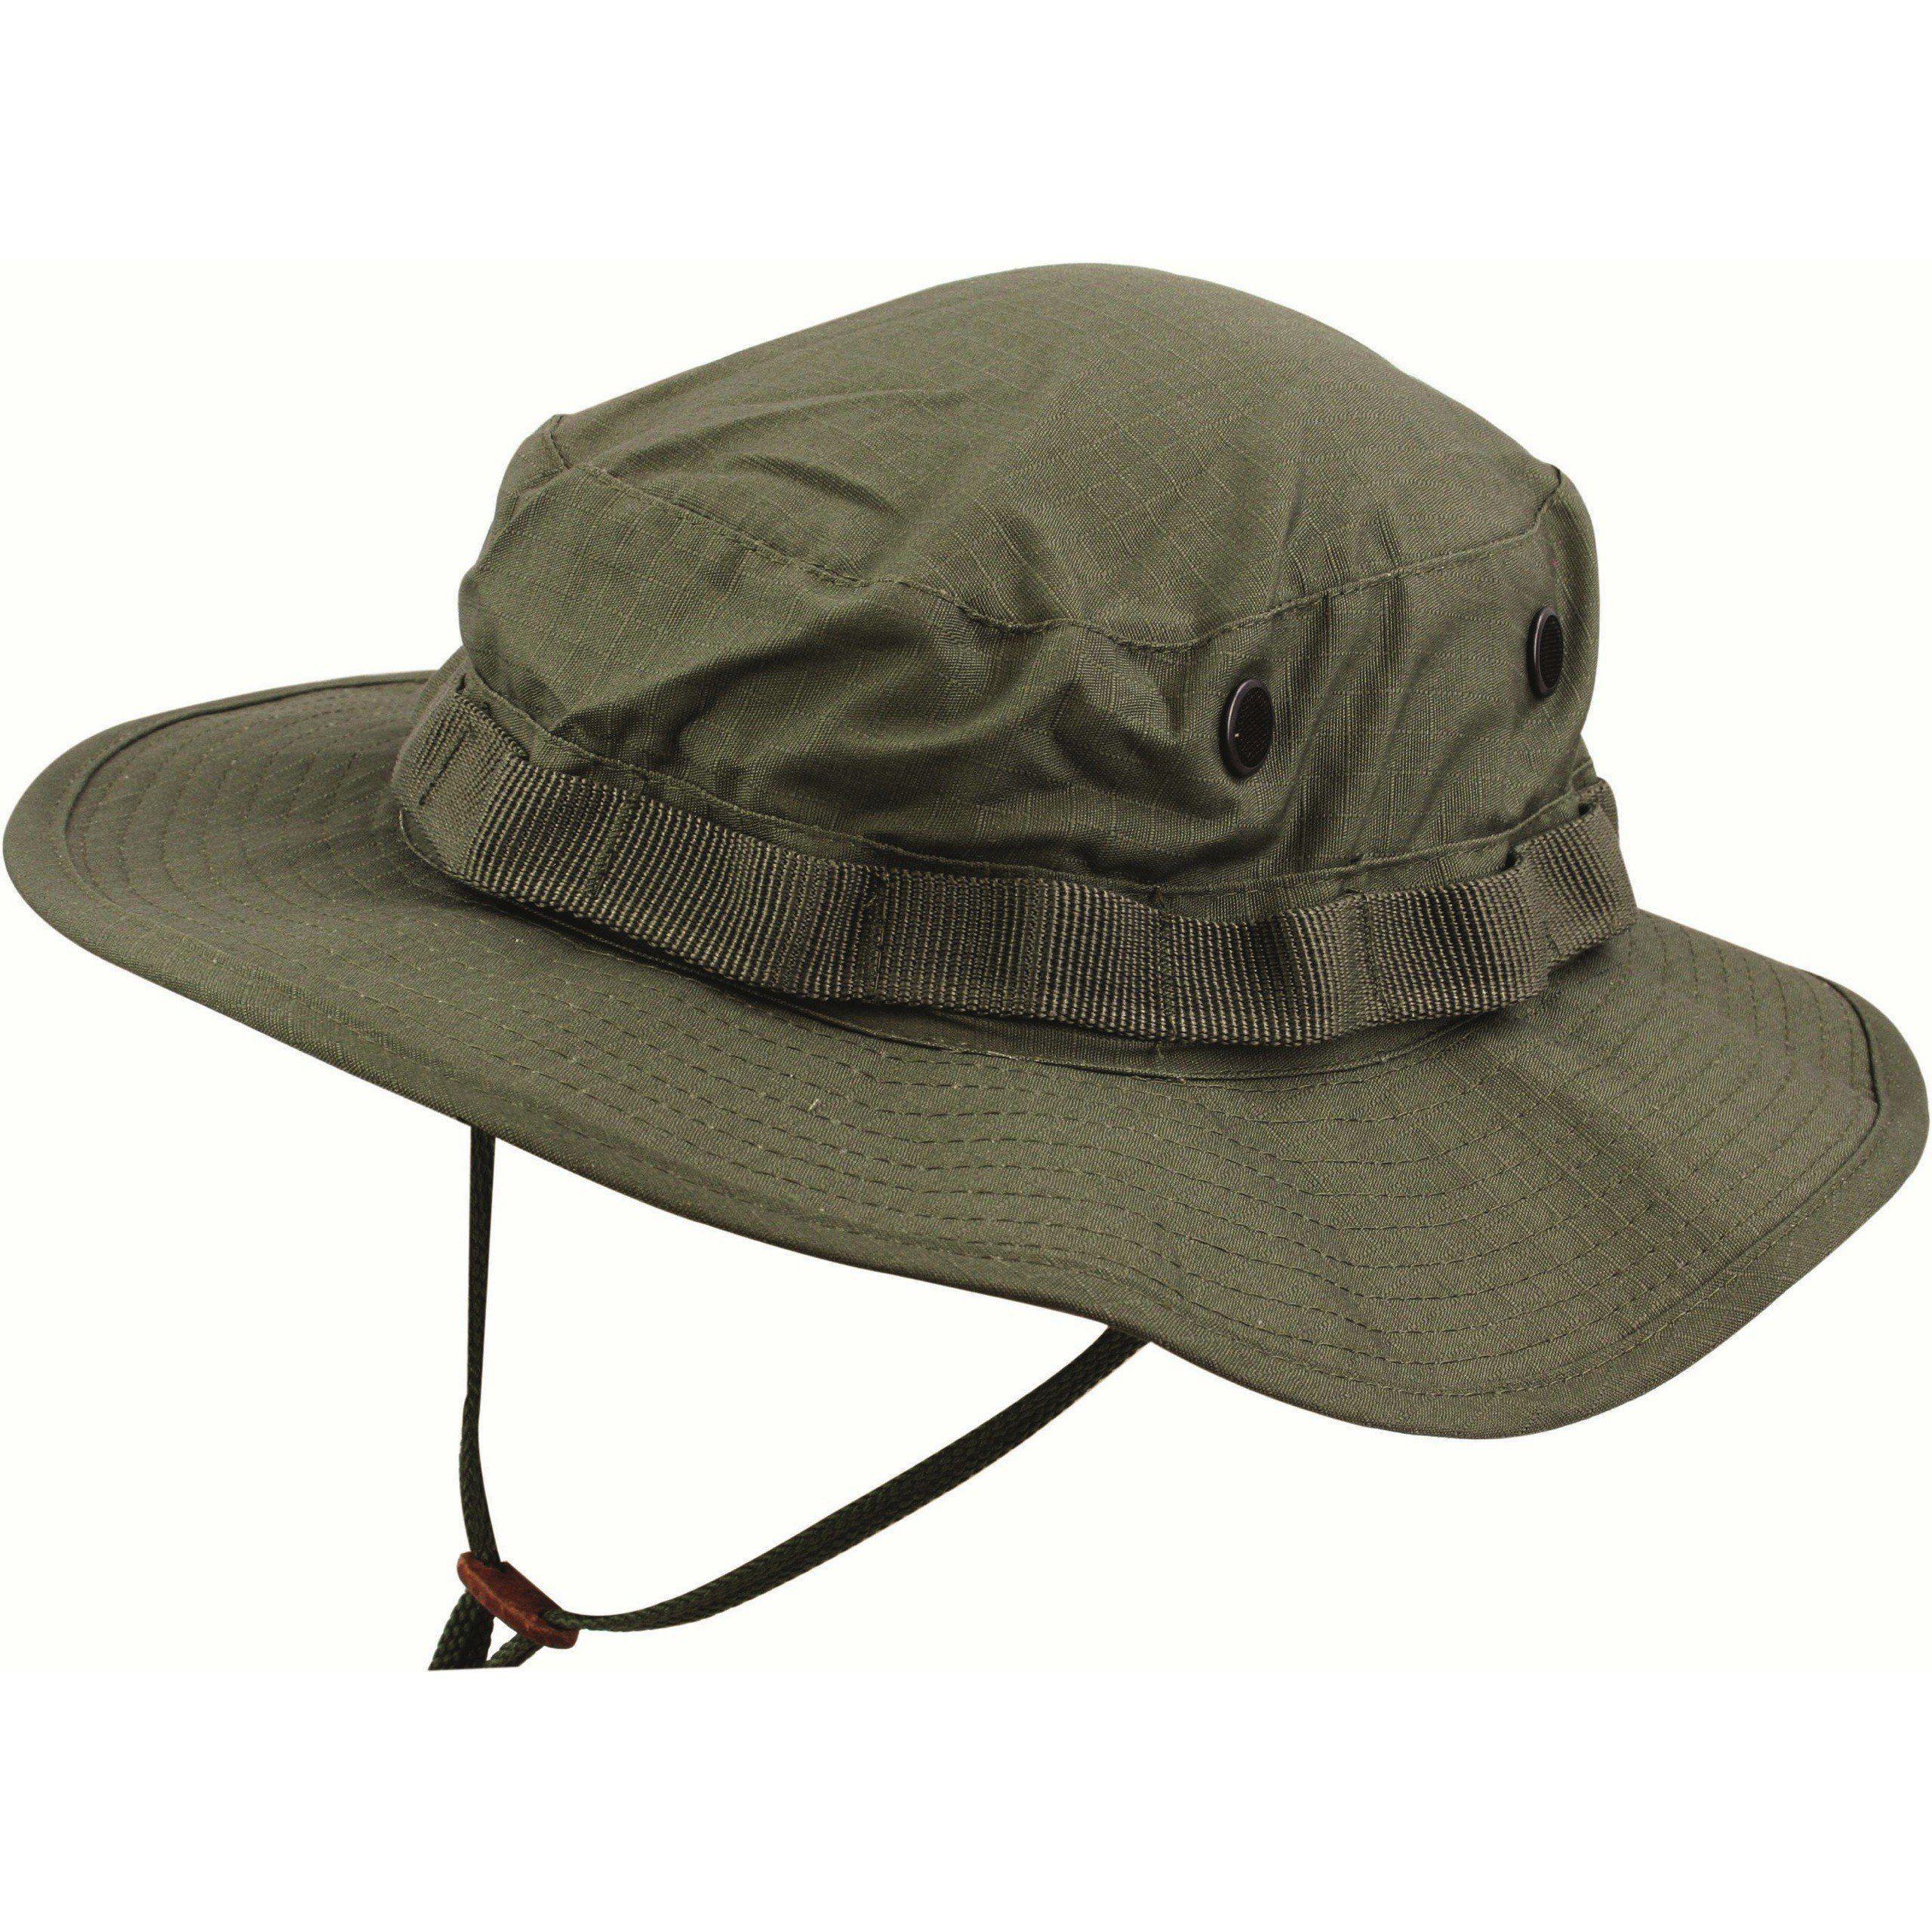 Snickerdoodle recomended Camouflage hat blowjob